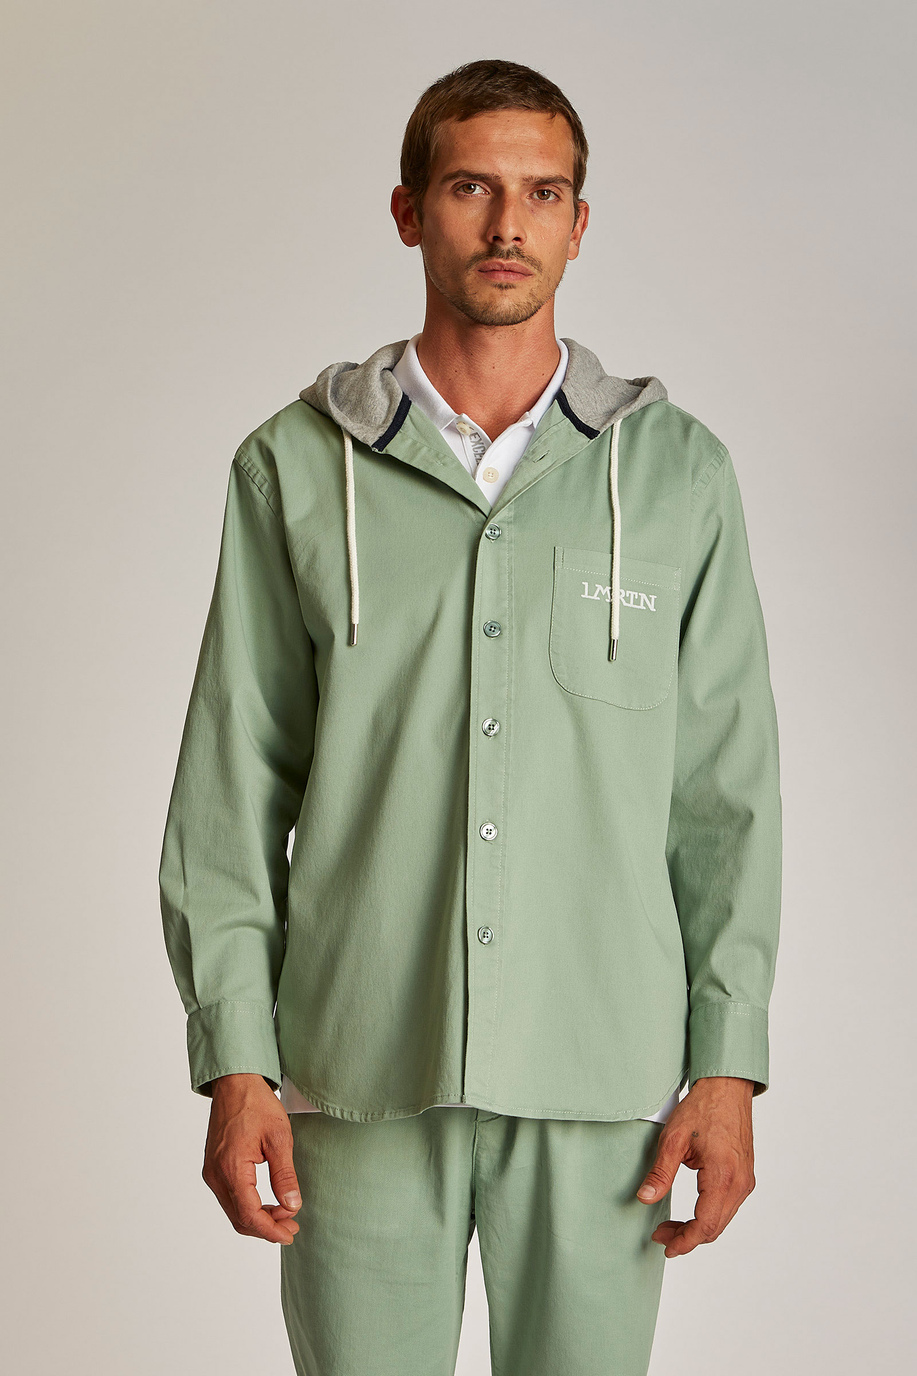 Men's oversized hooded jacket in 100% cotton fabric - Outerwear | La Martina - Official Online Shop